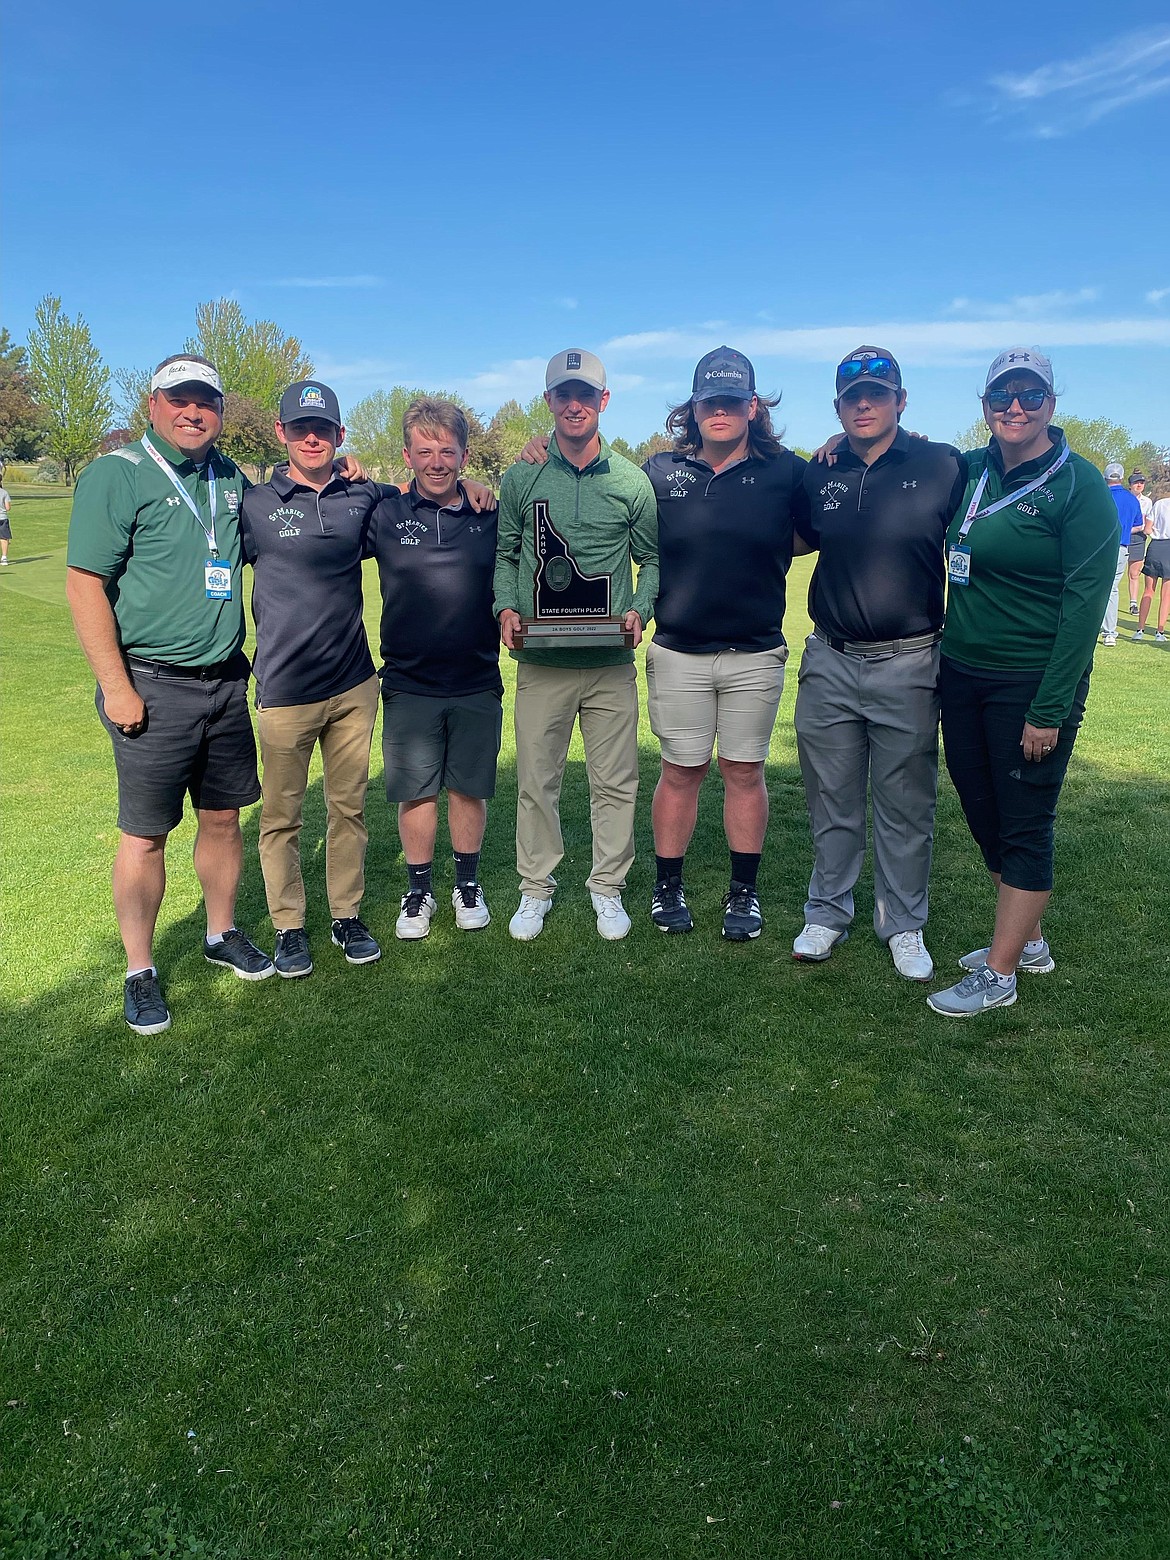 Courtesy photo
The St. Maries boys golf team finished fourth in the state 2A tournament at River Burch Golf Course in Star on Tuesday. From left, are: St. Maries boys golf coach Bryan Chase, Lance Hamblin, Corbin Scheer, Greyson Sands, Landon Warren, Seth Swallows and St. Maries girls golf coach Becky Harold.